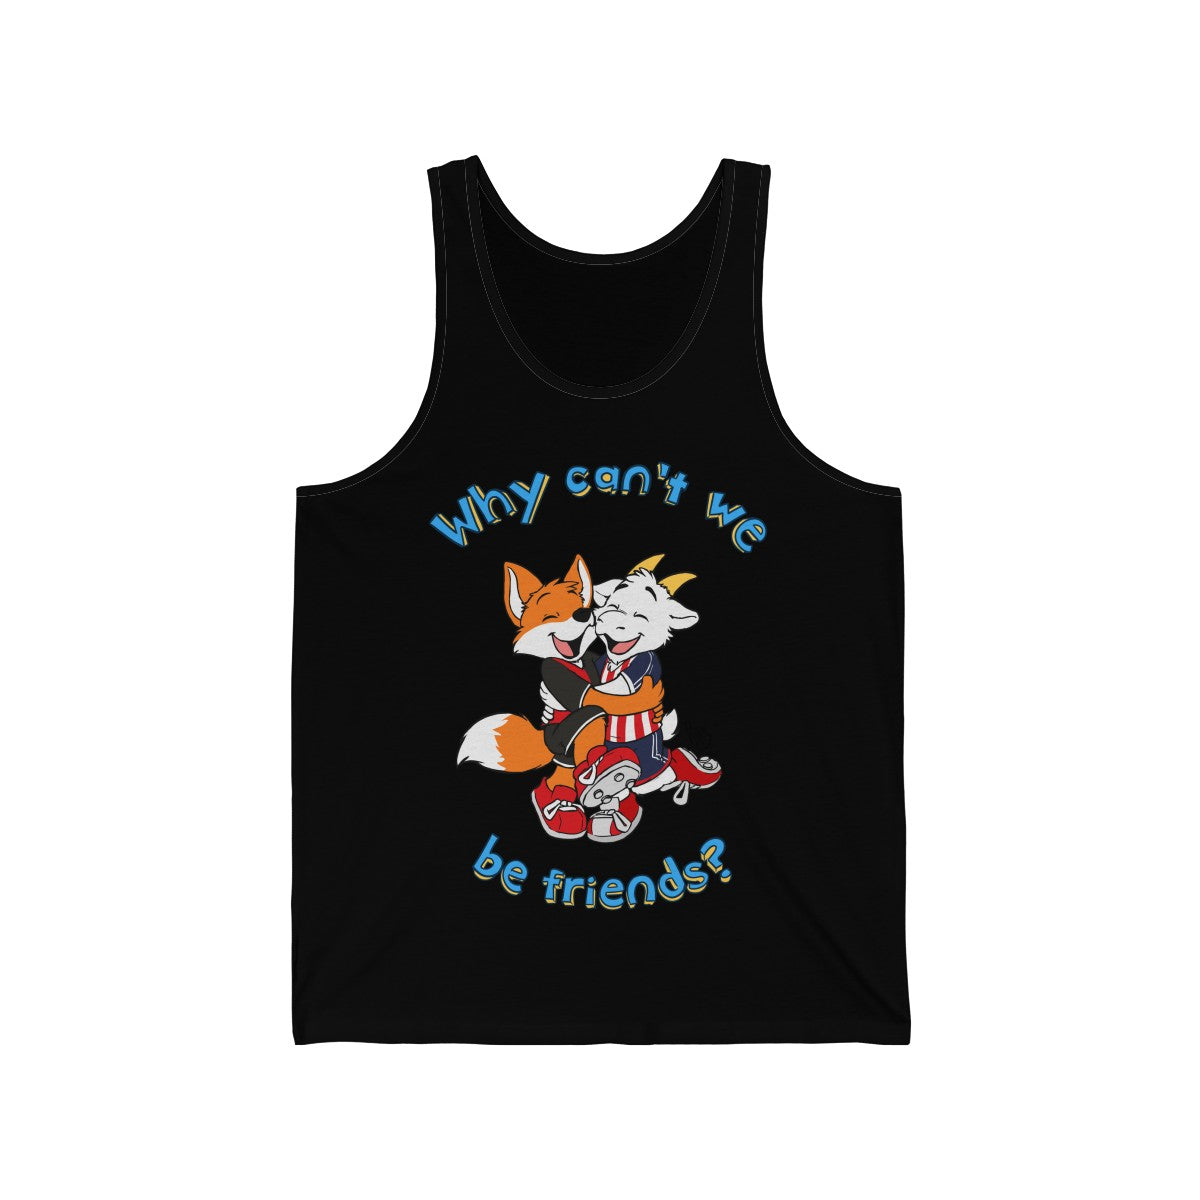 Why Can't we be Friends 2? - Tank Top Tank Top Paco Panda Black XS 